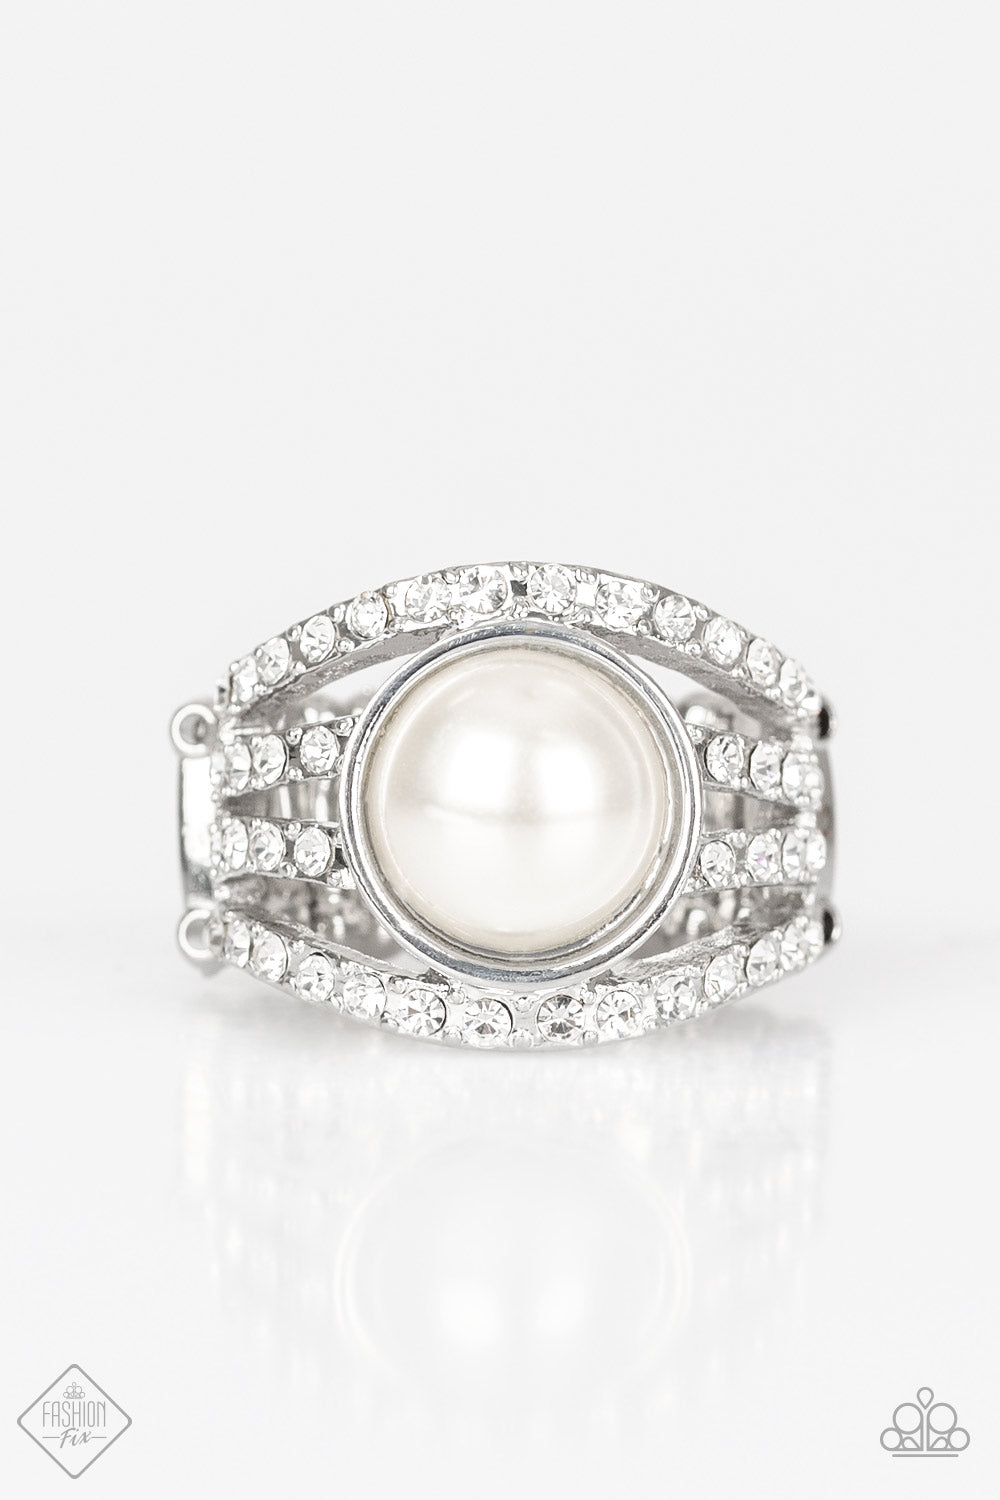 Paparazzi Accessories ✽ A Big Break - Silver Ring✽Flat Rate Ship $4.50✽ | Silver  rings, Silver pearl ring, Silver